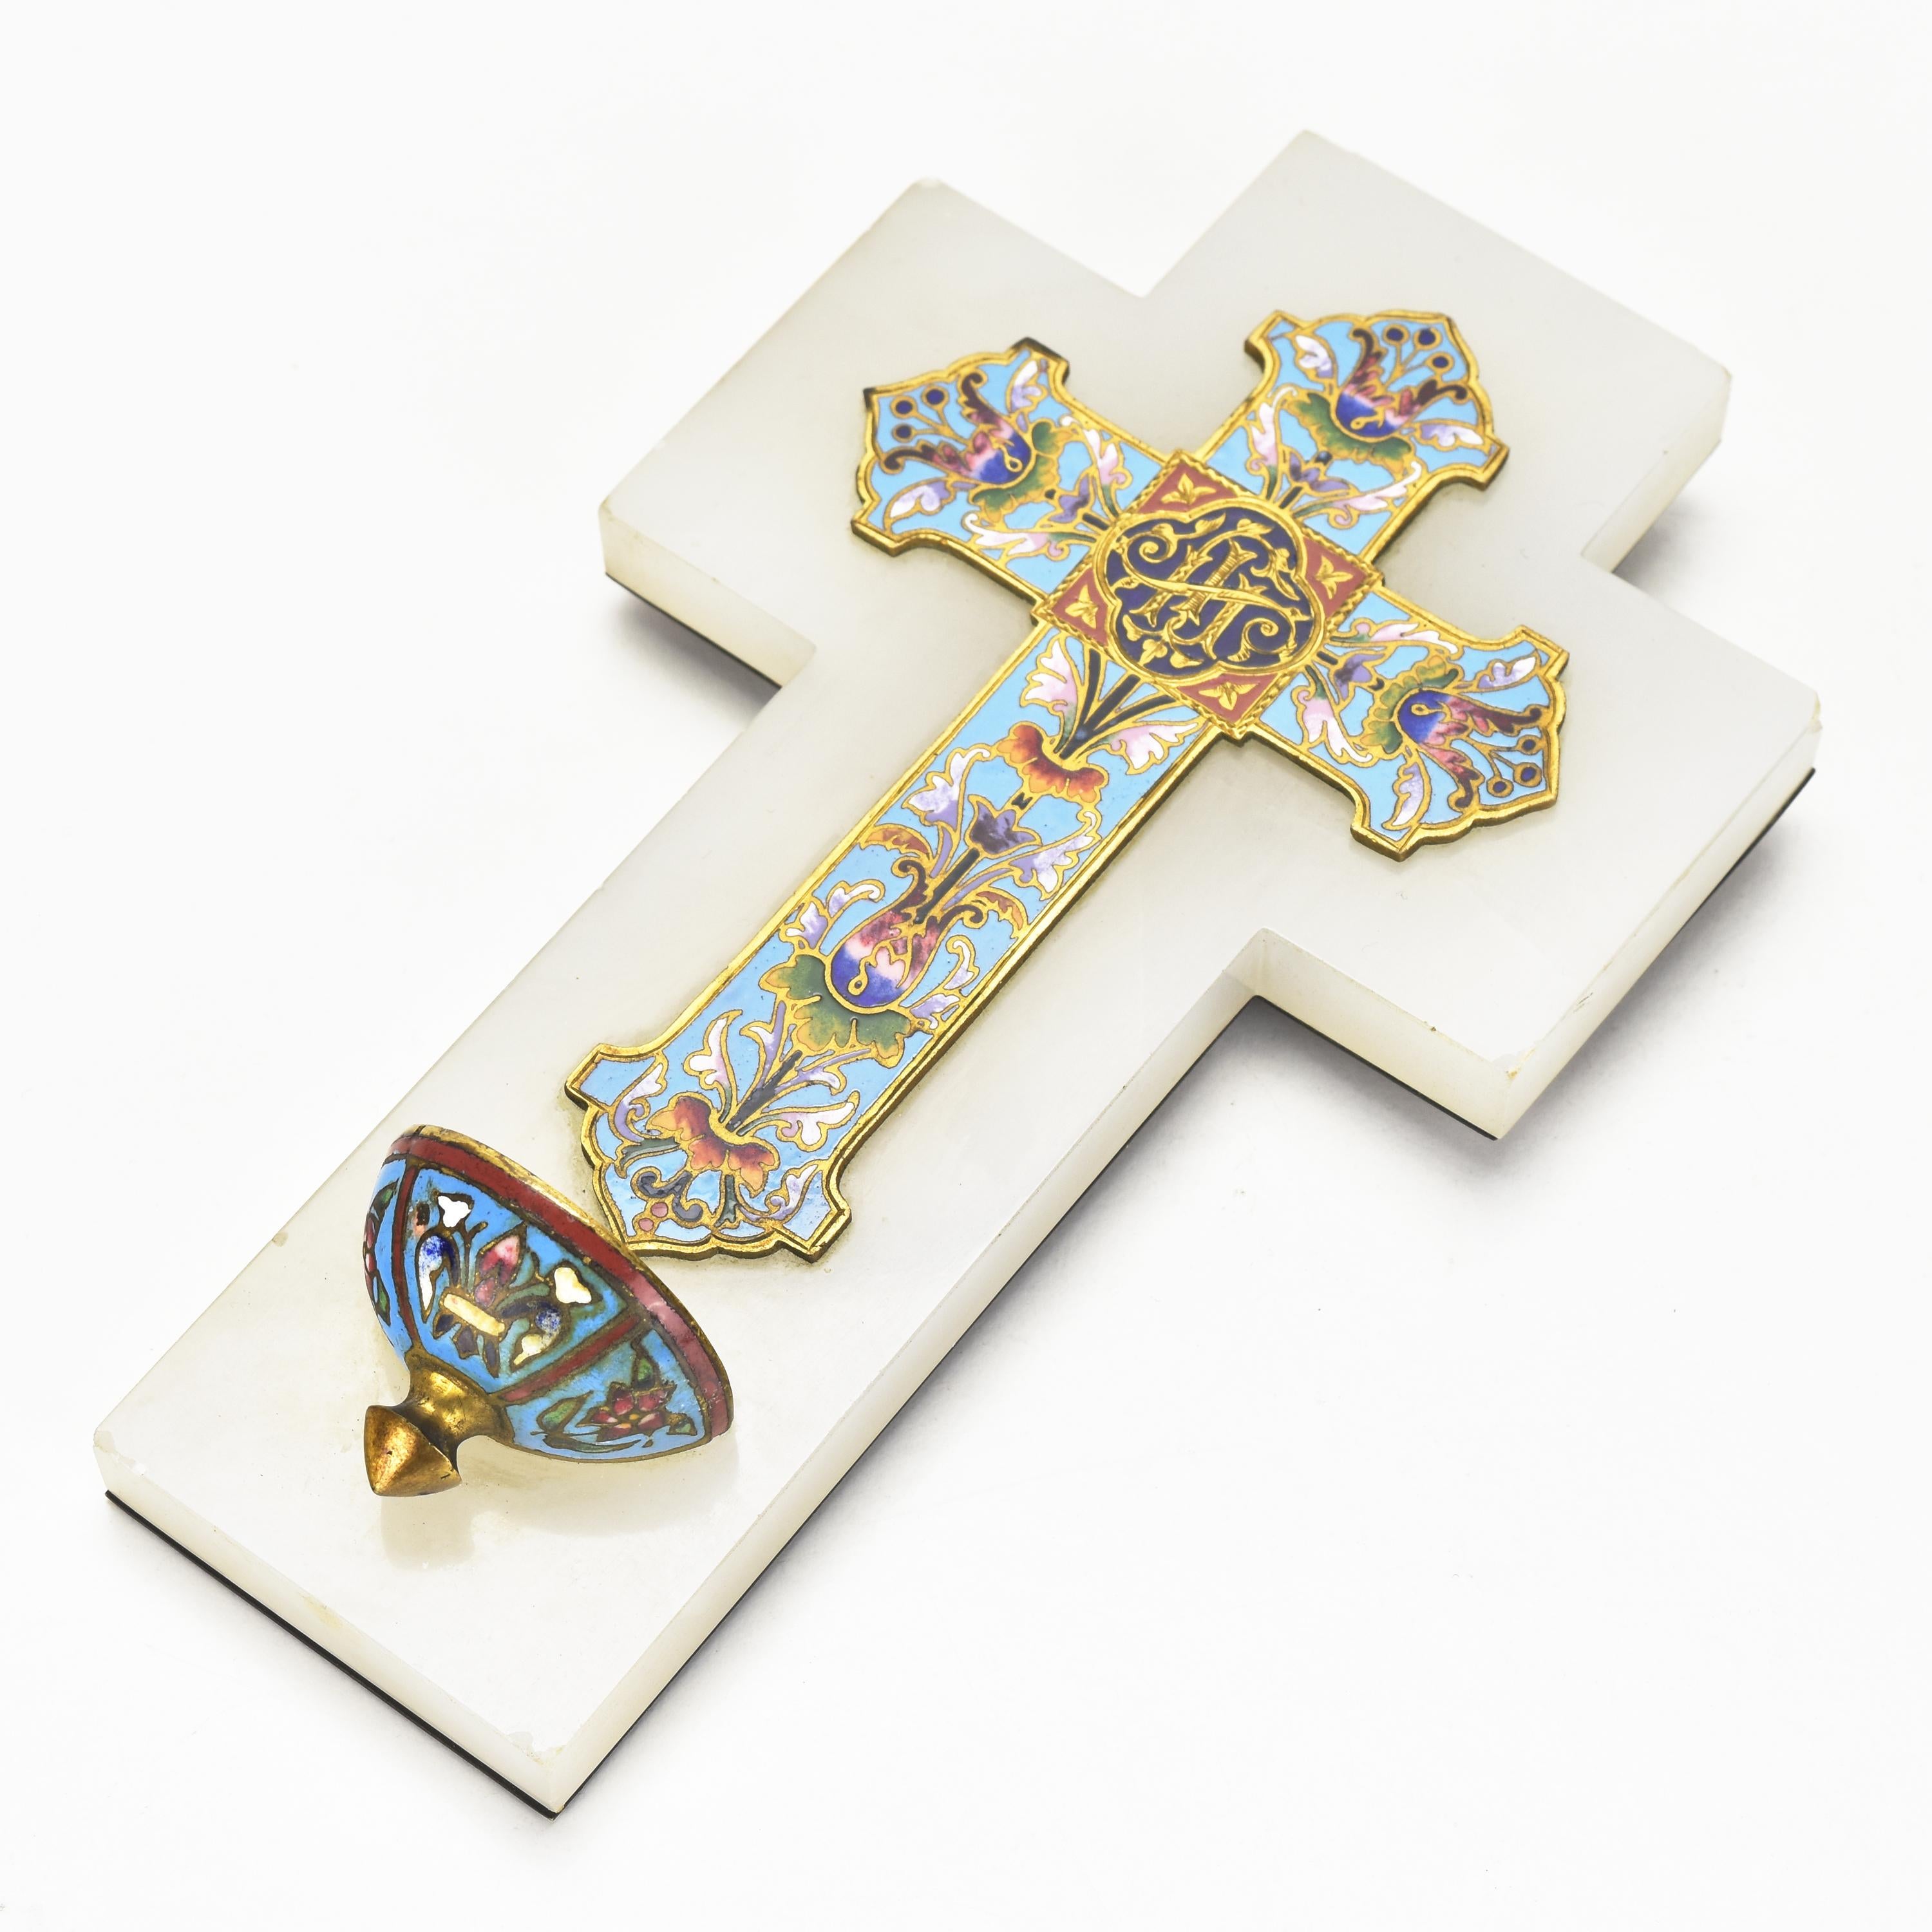 The antique French Victorian gilt champlevé cloisonné crucifix is a magnificent and rare religious artifact that exemplifies the artistry and craftsmanship of the Victorian era. The crucifix is likely made from gilt metal, a process where a thin